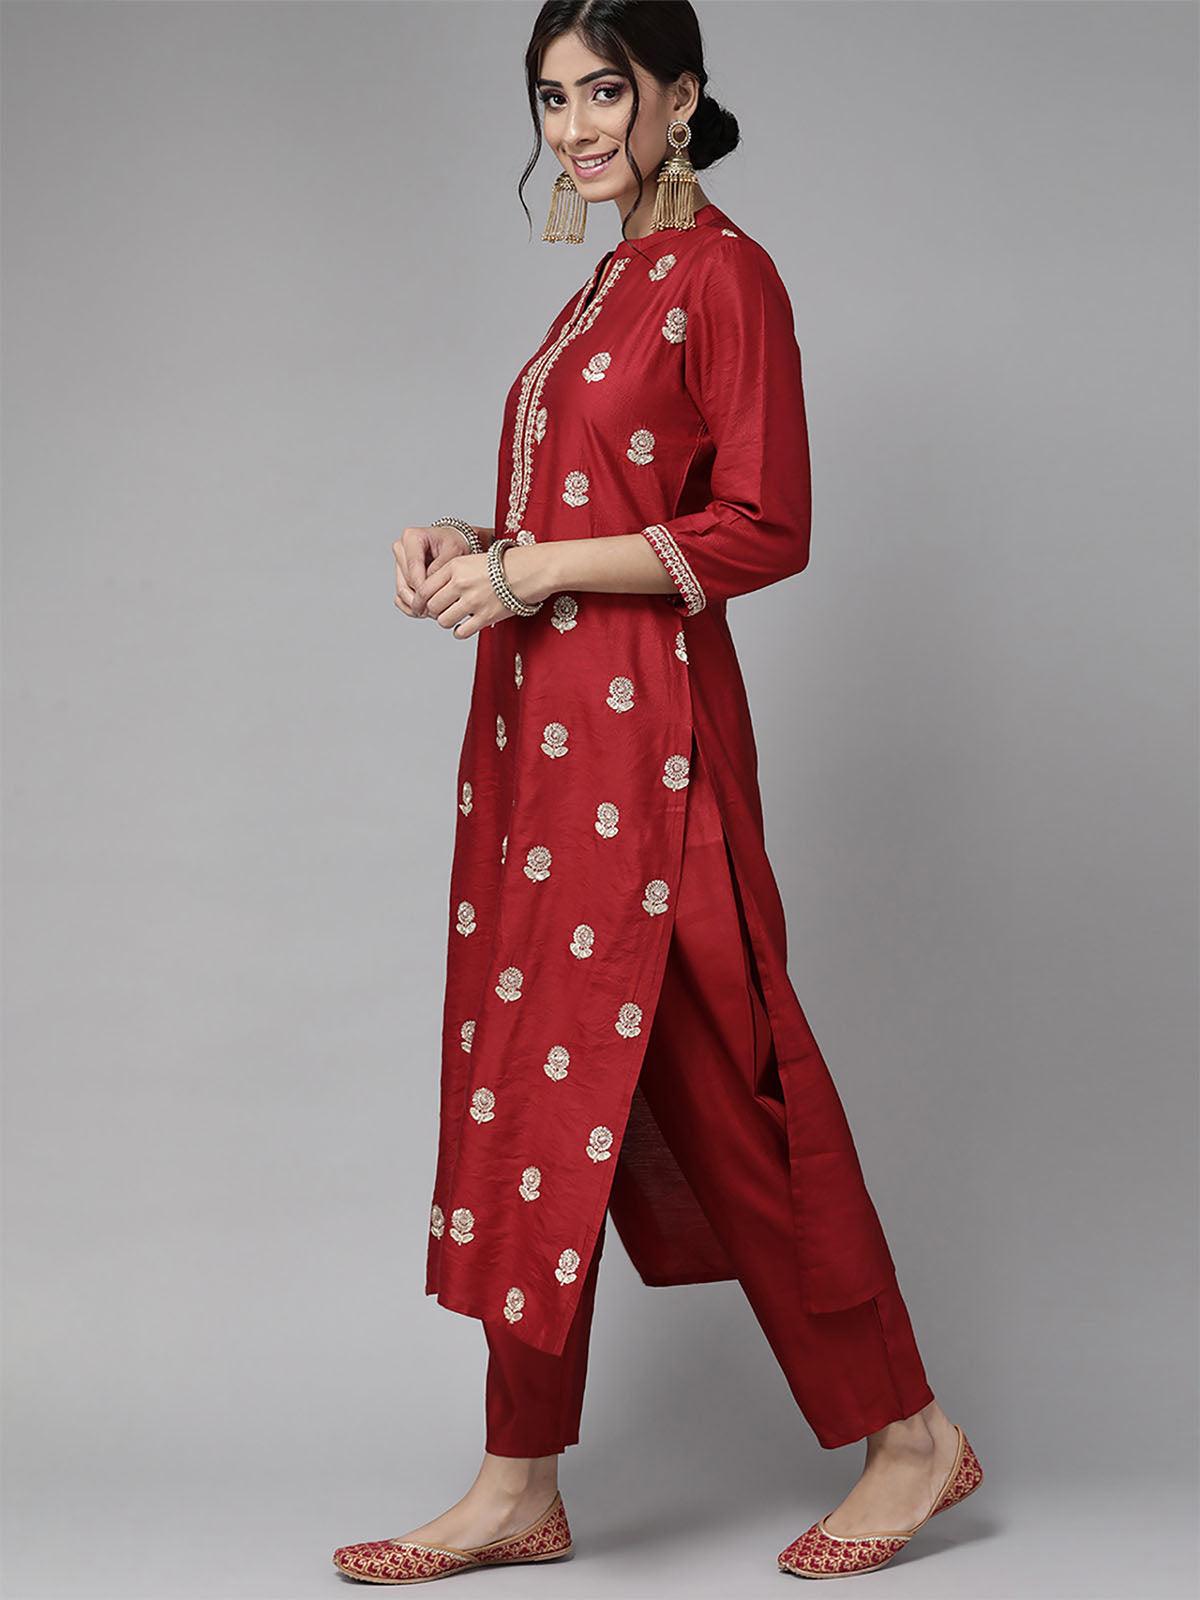 Women's Red Floral Printed Straight Kurta Palazzo With Dupatta Set - Odette